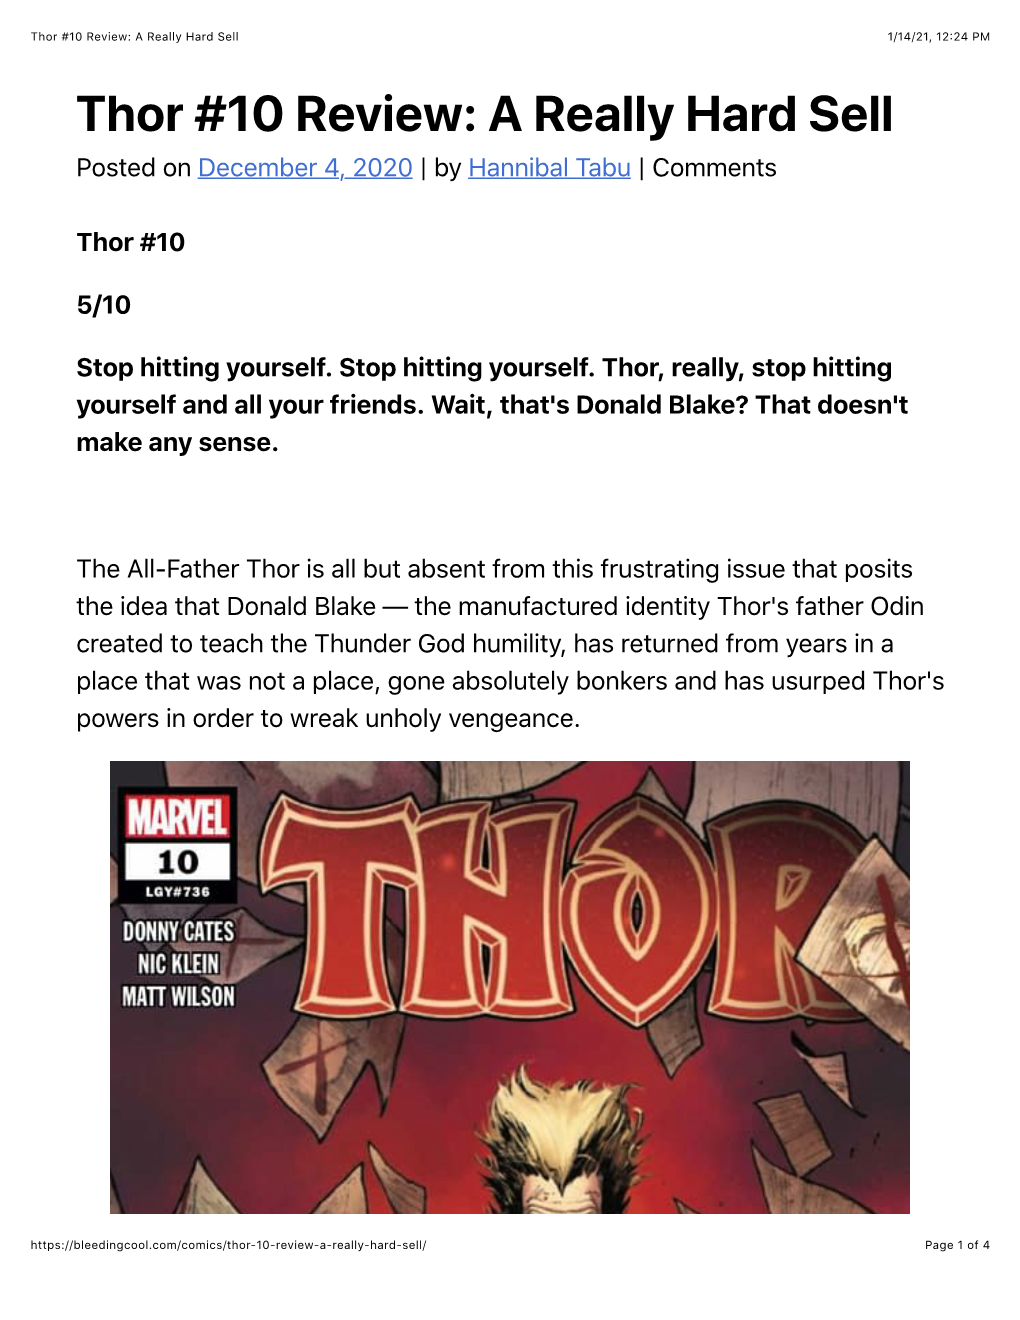 Thor #10 Review: a Really Hard Sell 1/14/21, 12:24 PM Thor #10 Review: a Really Hard Sell Posted on December 4, 2020 | by Hannibal Tabu | Comments